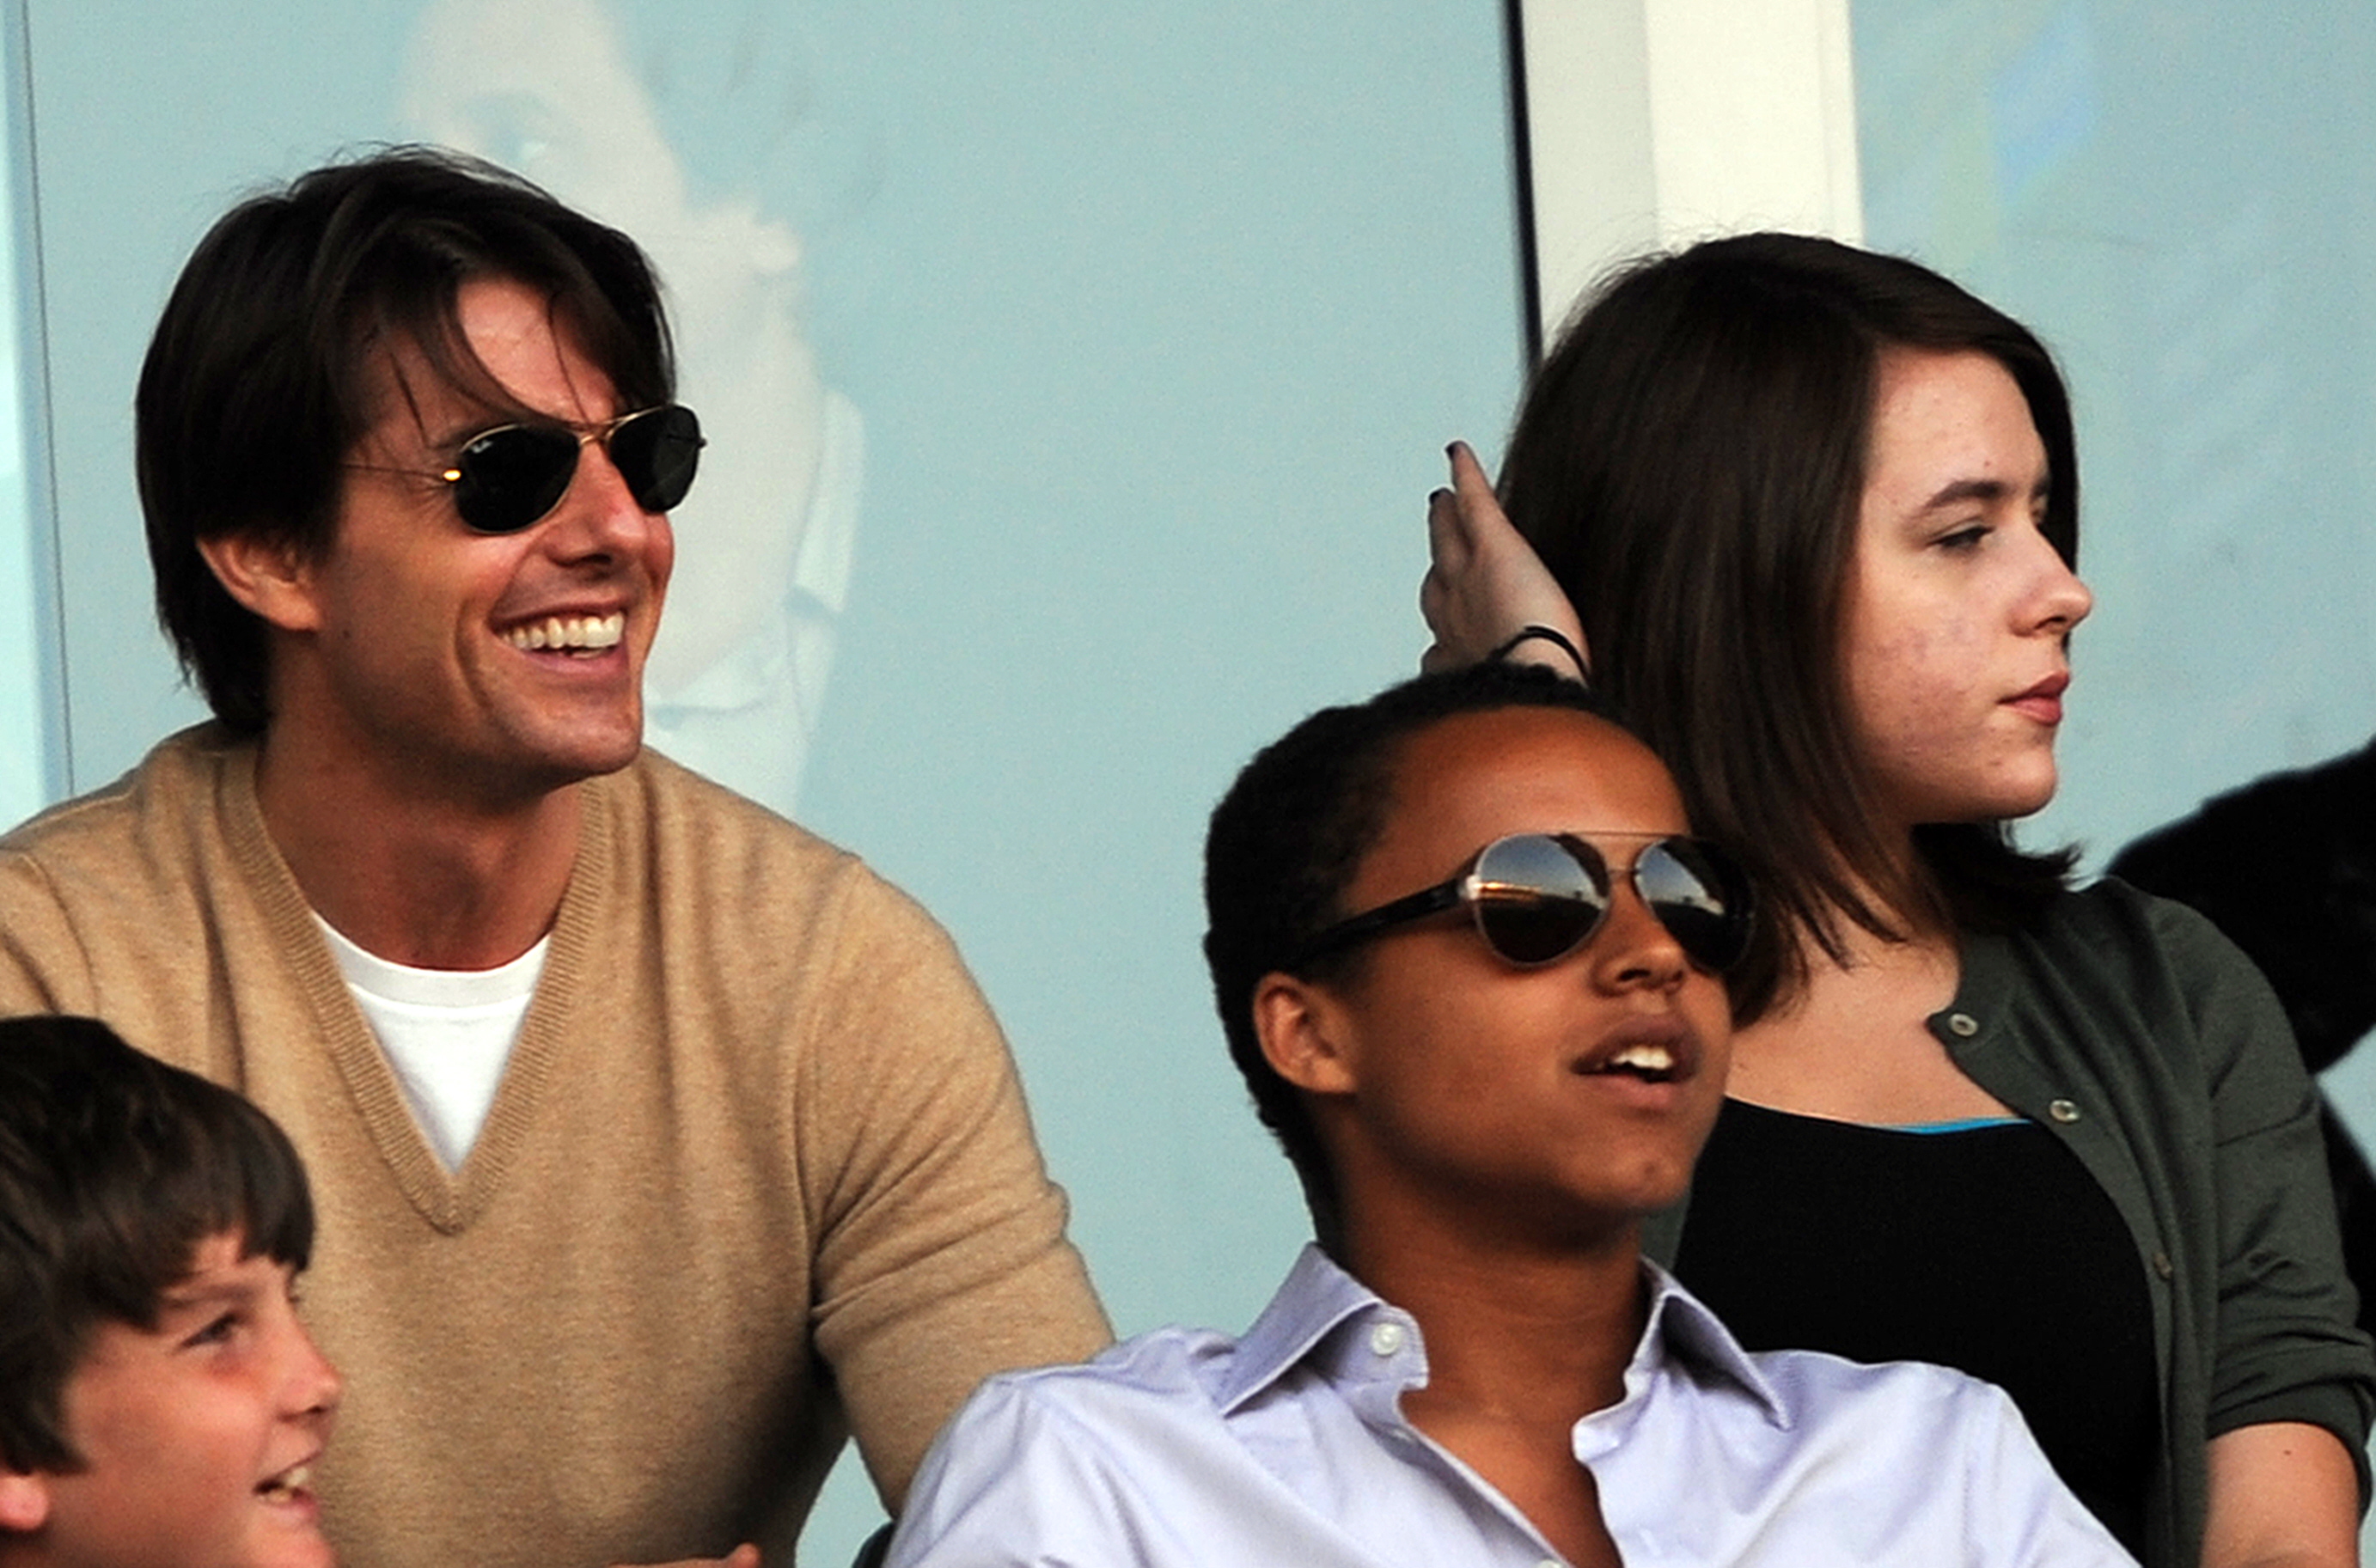 Tom Cruise and his children Connor (C) and Isabella (R) during a friendly game in Carson, California on July 19, 2009 | Source: Getty Images